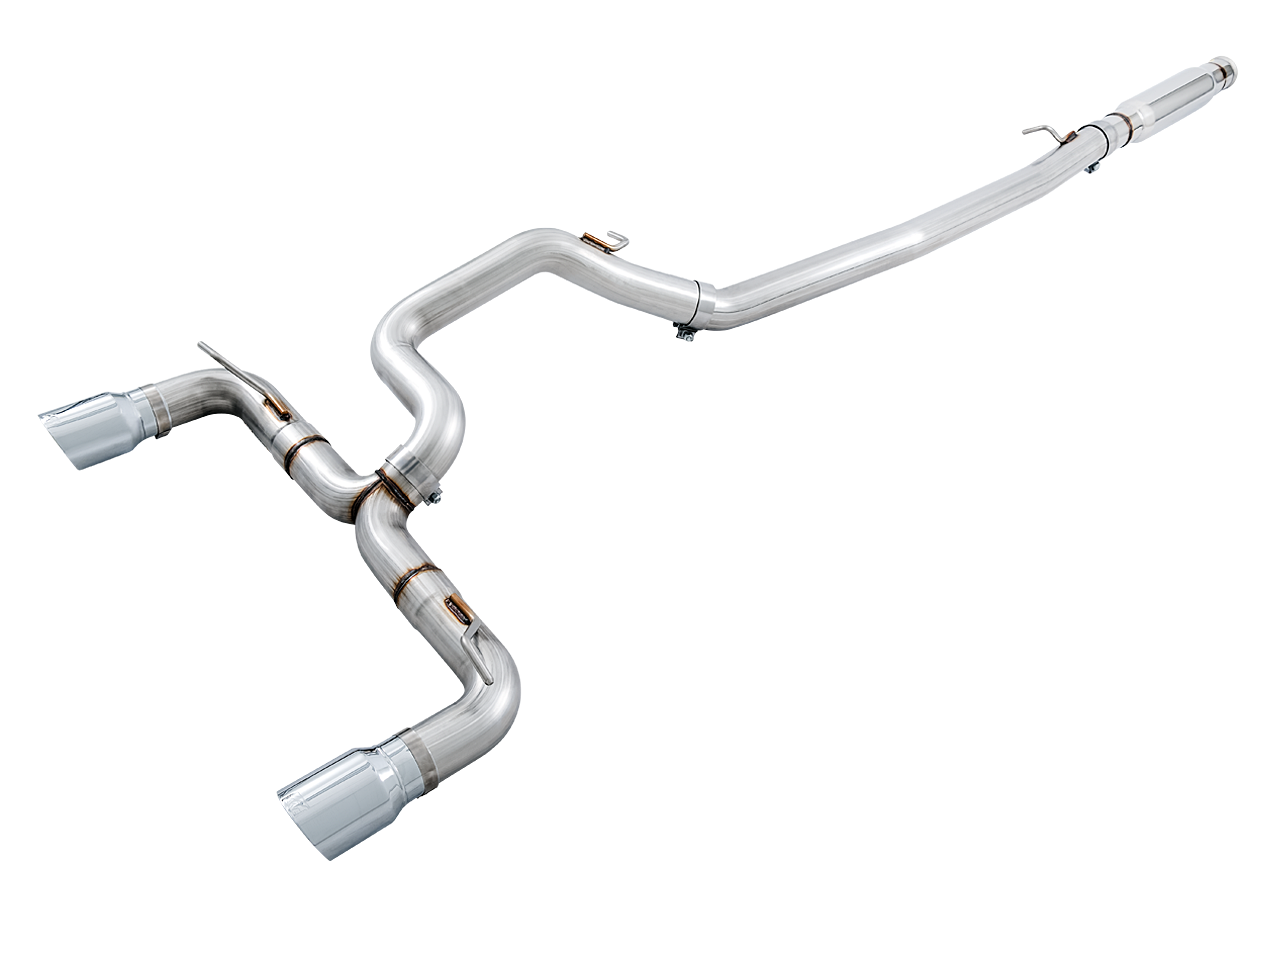 AWE Track Edition Cat-back Exhaust for Ford Focus RS - Chrome Silver Tips (3020-32030)